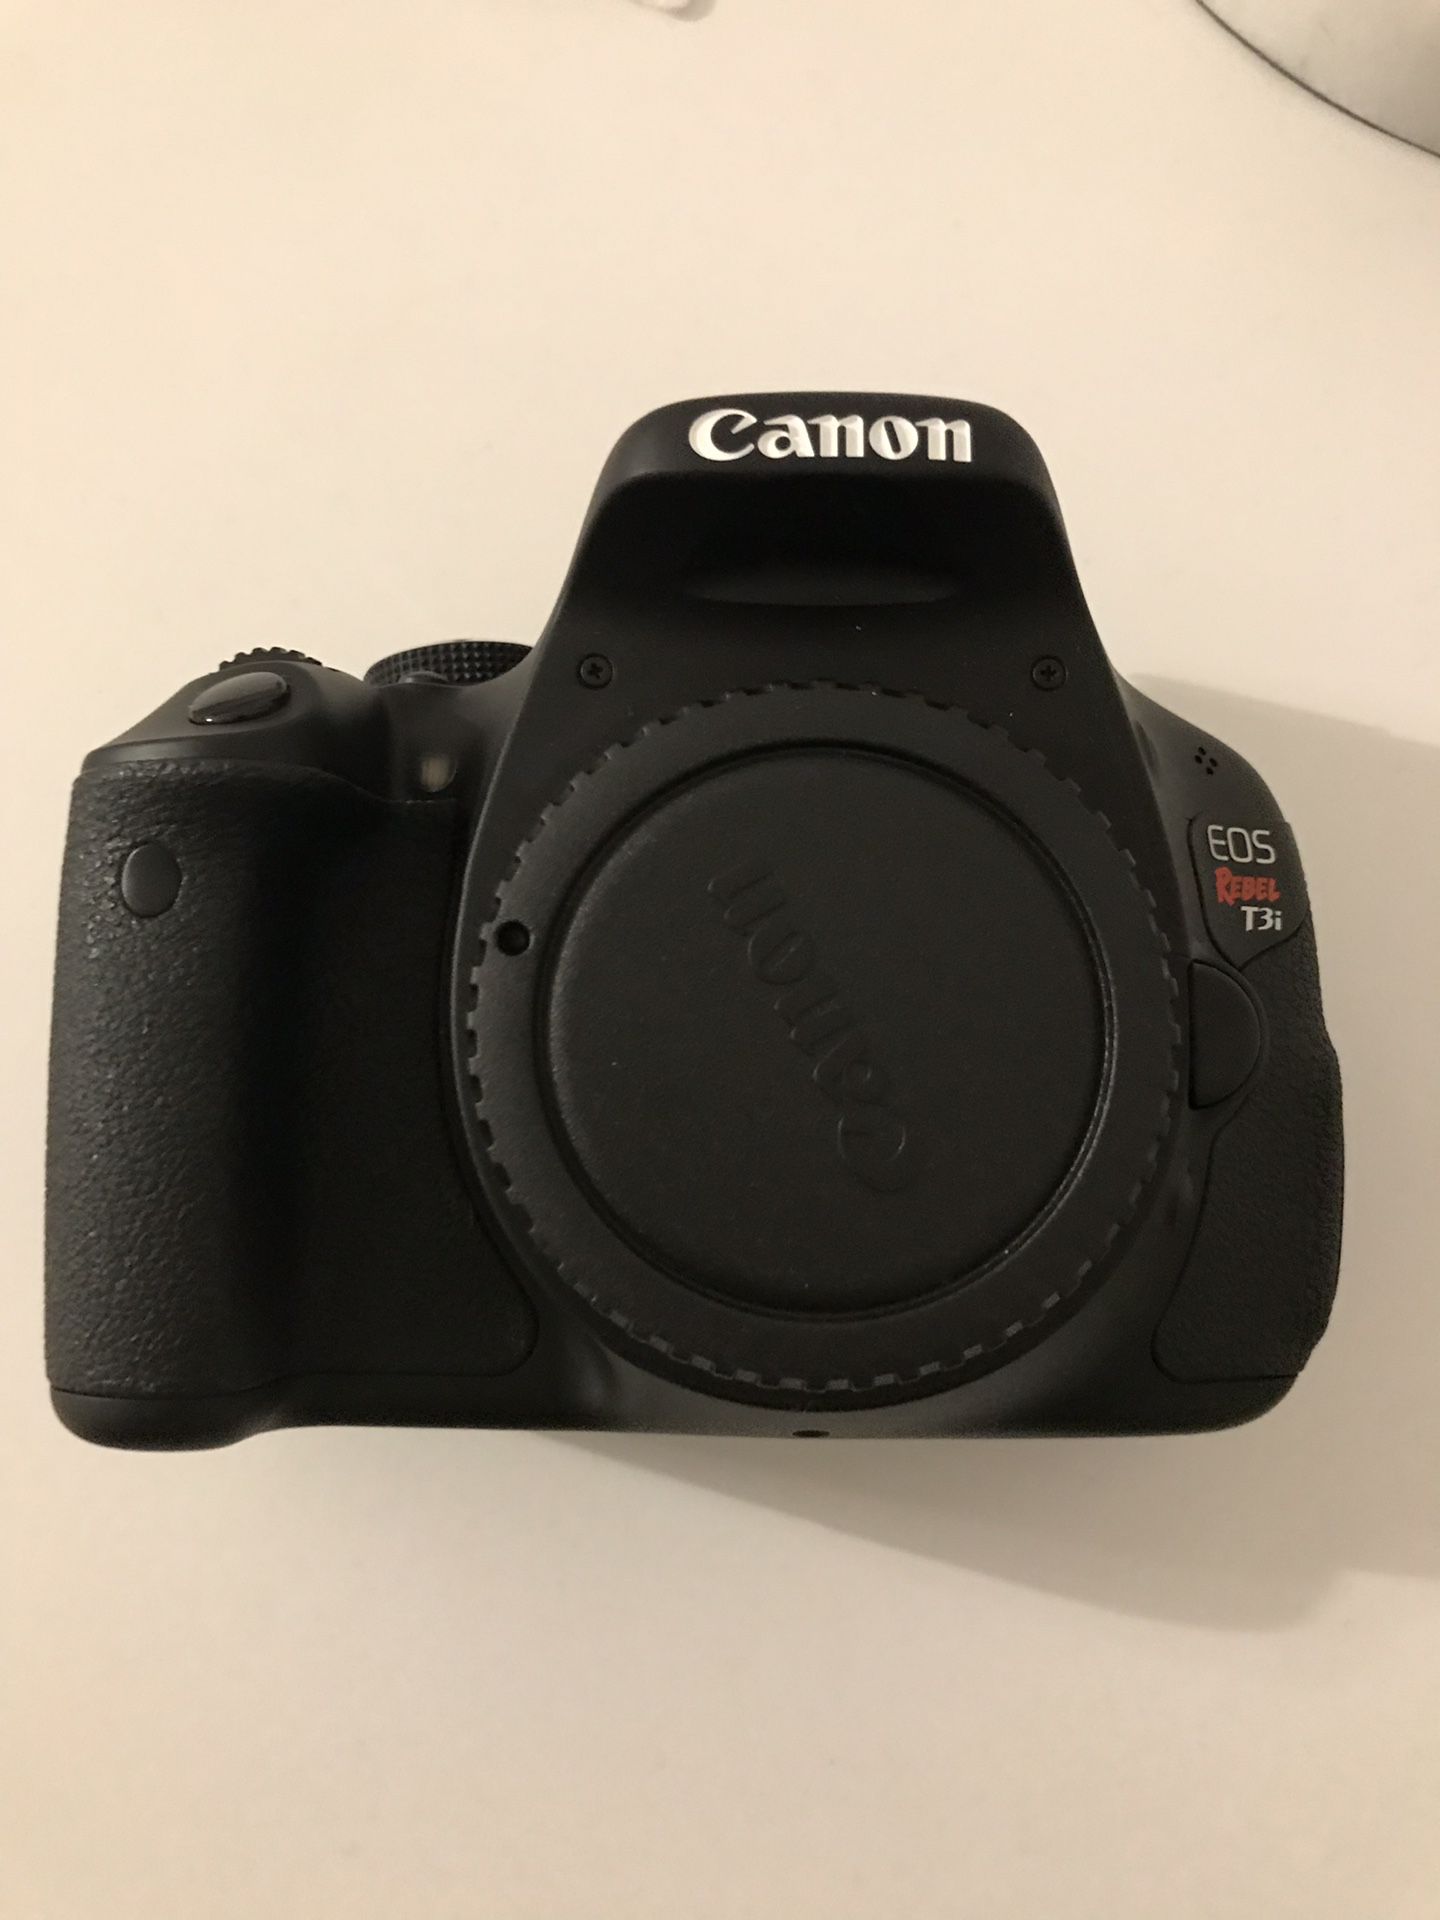 Canon Rebel T3i Camera with lens and printer